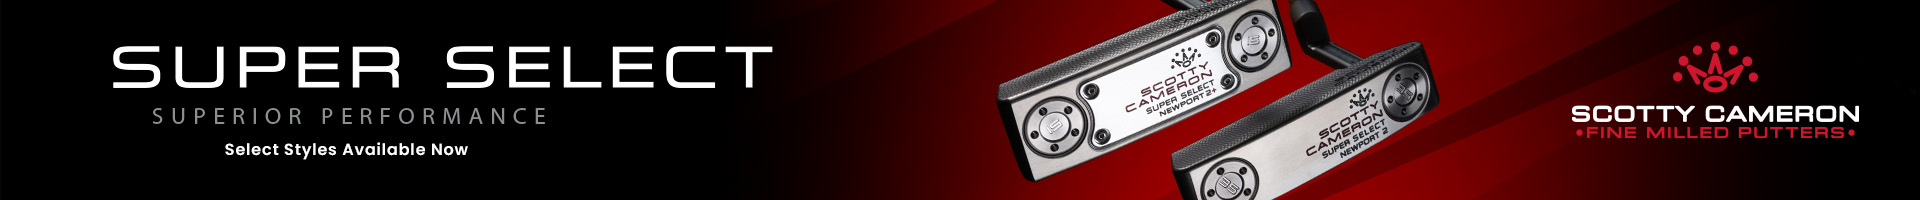 New Scotty Cameron Super Select Putters